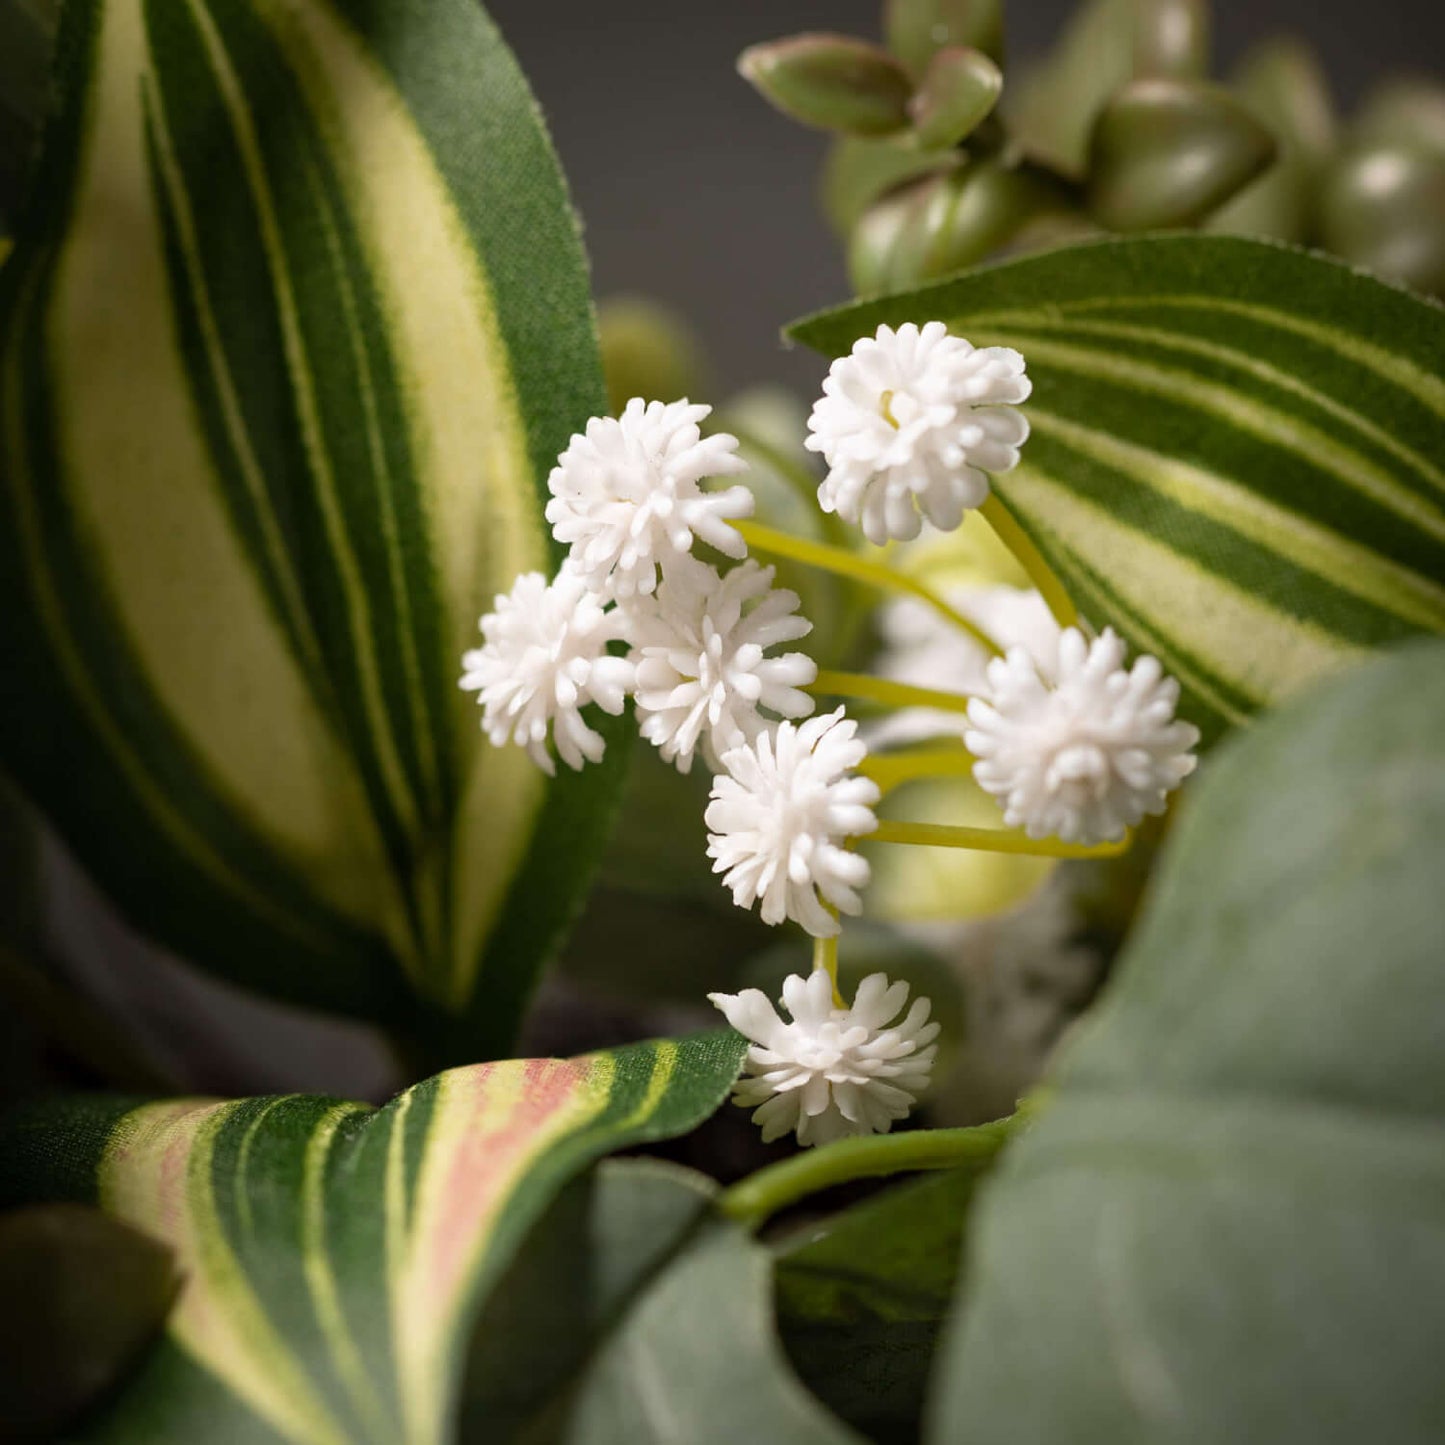 close up view of the small white flowers in the mixed green folilage